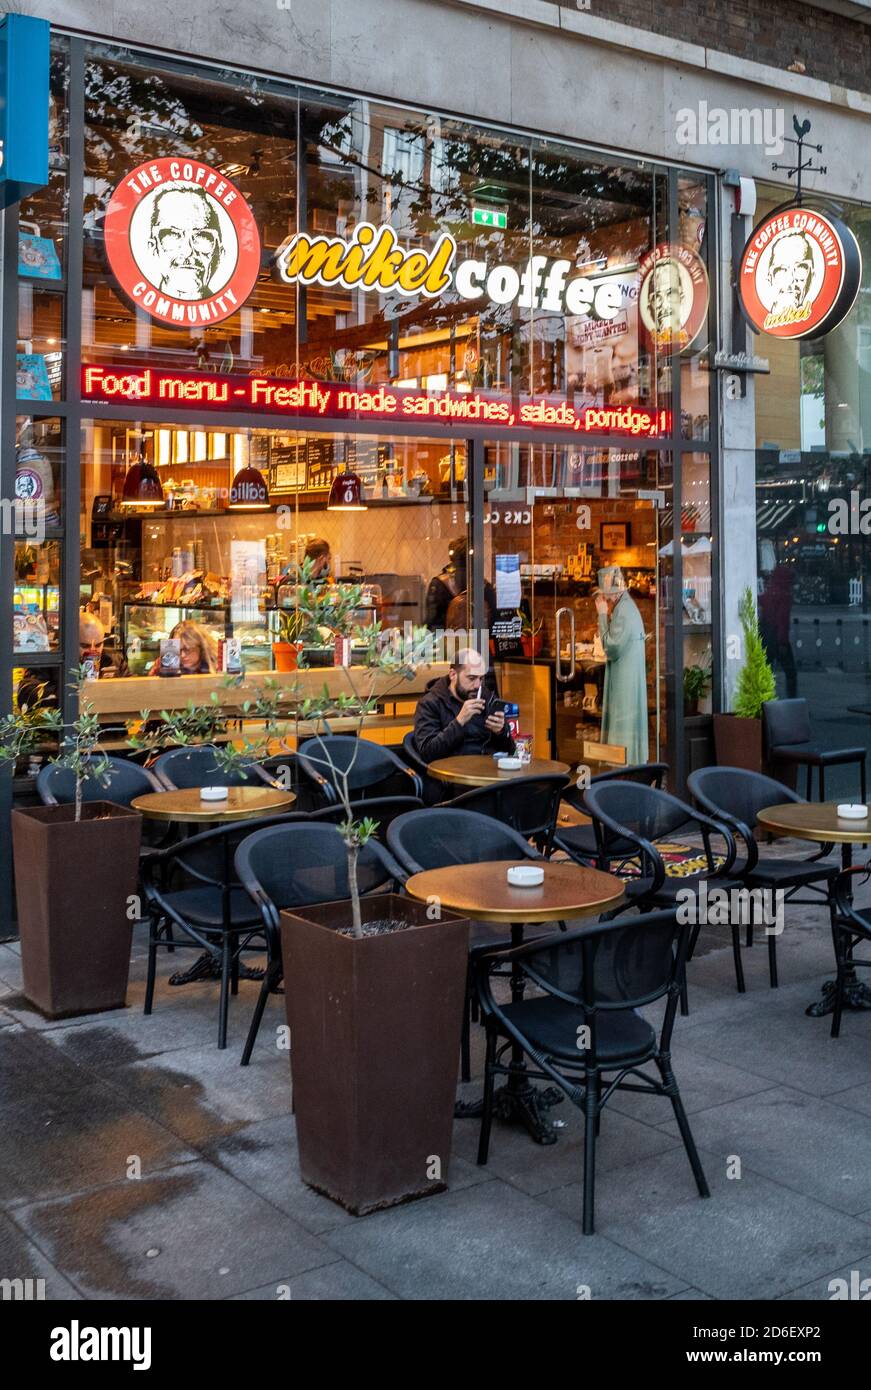 Mikel Coffee Shop London  - Mikel Coffee Company is a Greek based coffee shop chain with around 250 stores worldwide. Mikel Coffeehouse, Stock Photo